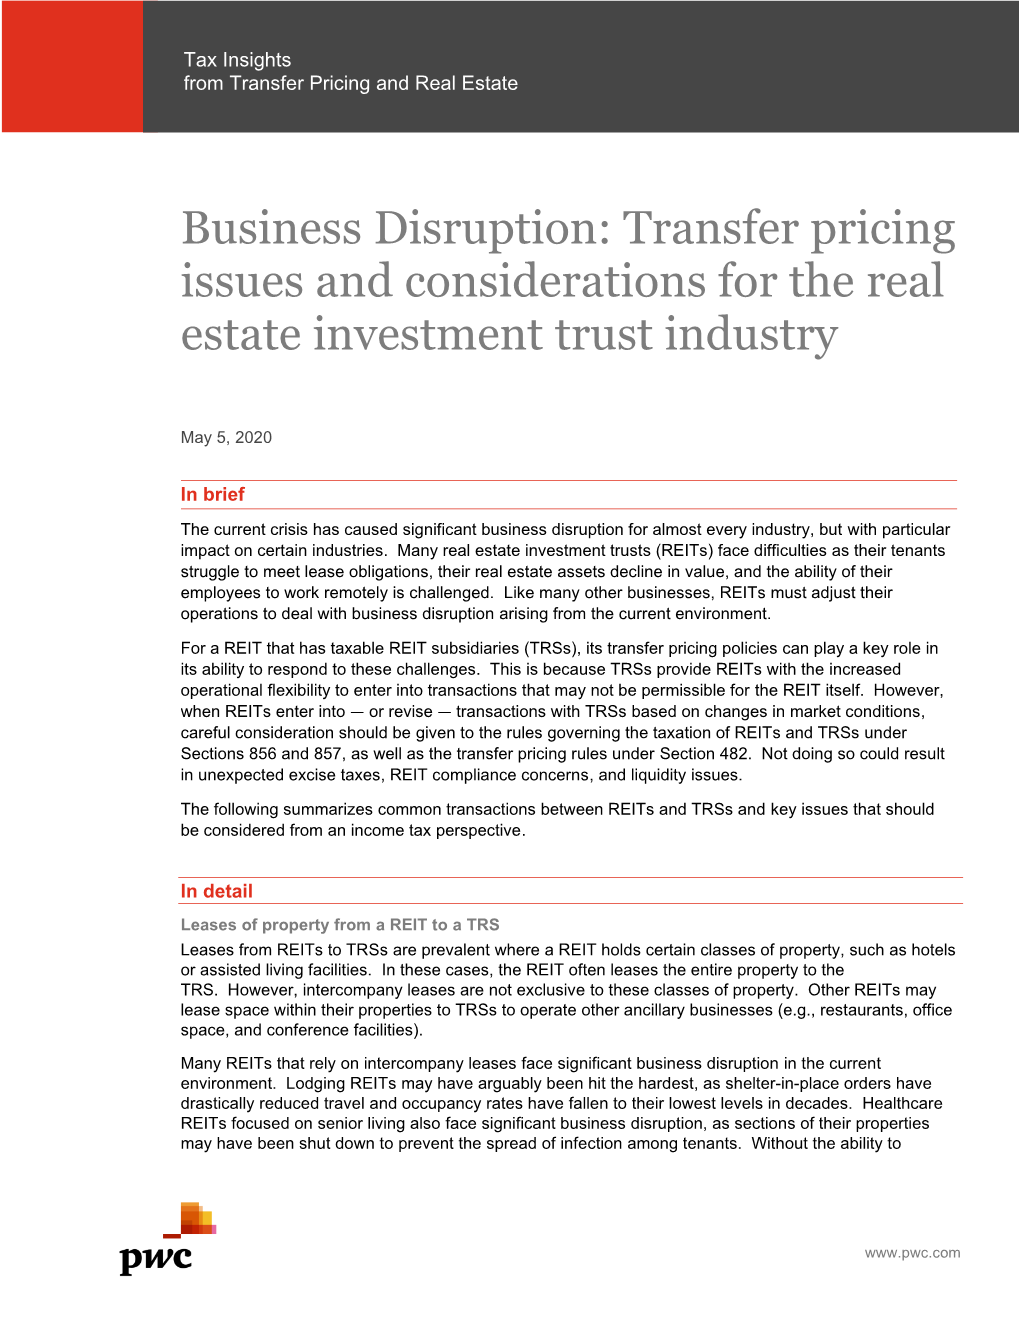 Business Disruption: Transfer Pricing Issues and Considerations for the Real Estate Investment Trust Industry